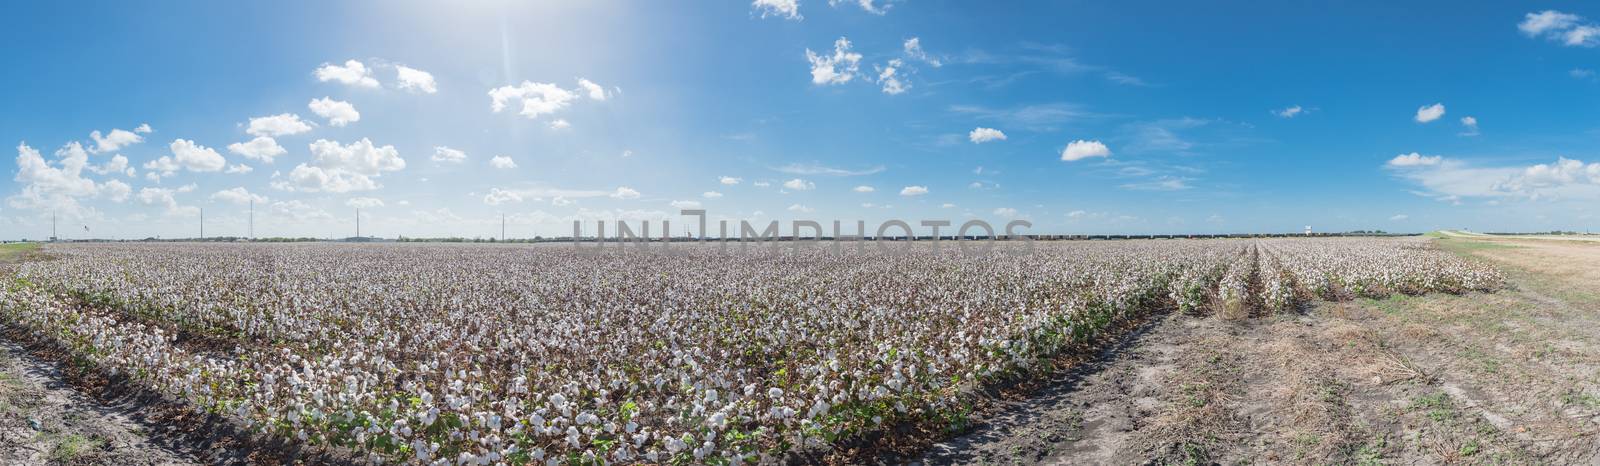 Panoramic view cotton farm in harvest season in Corpus Christi, Texas, USA by trongnguyen